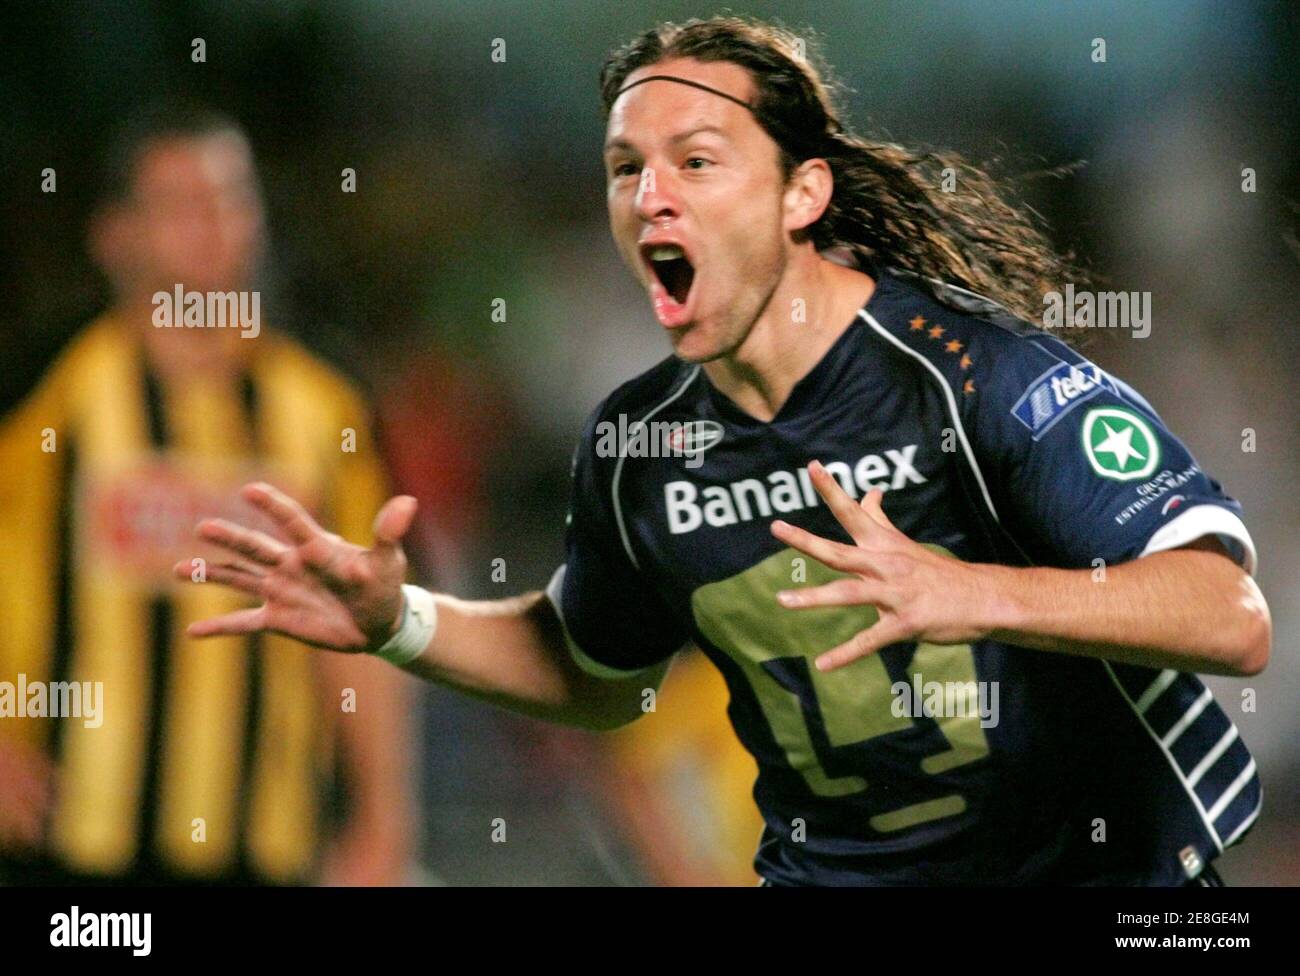 Pumas' Antonio de Nigris celebrates after scoring against The Strongest of  Bolivia during the first half of their Copa Sudamericana soccer match at  the University stadium in Mexico City September 20,2005. REUTERS/Daniel